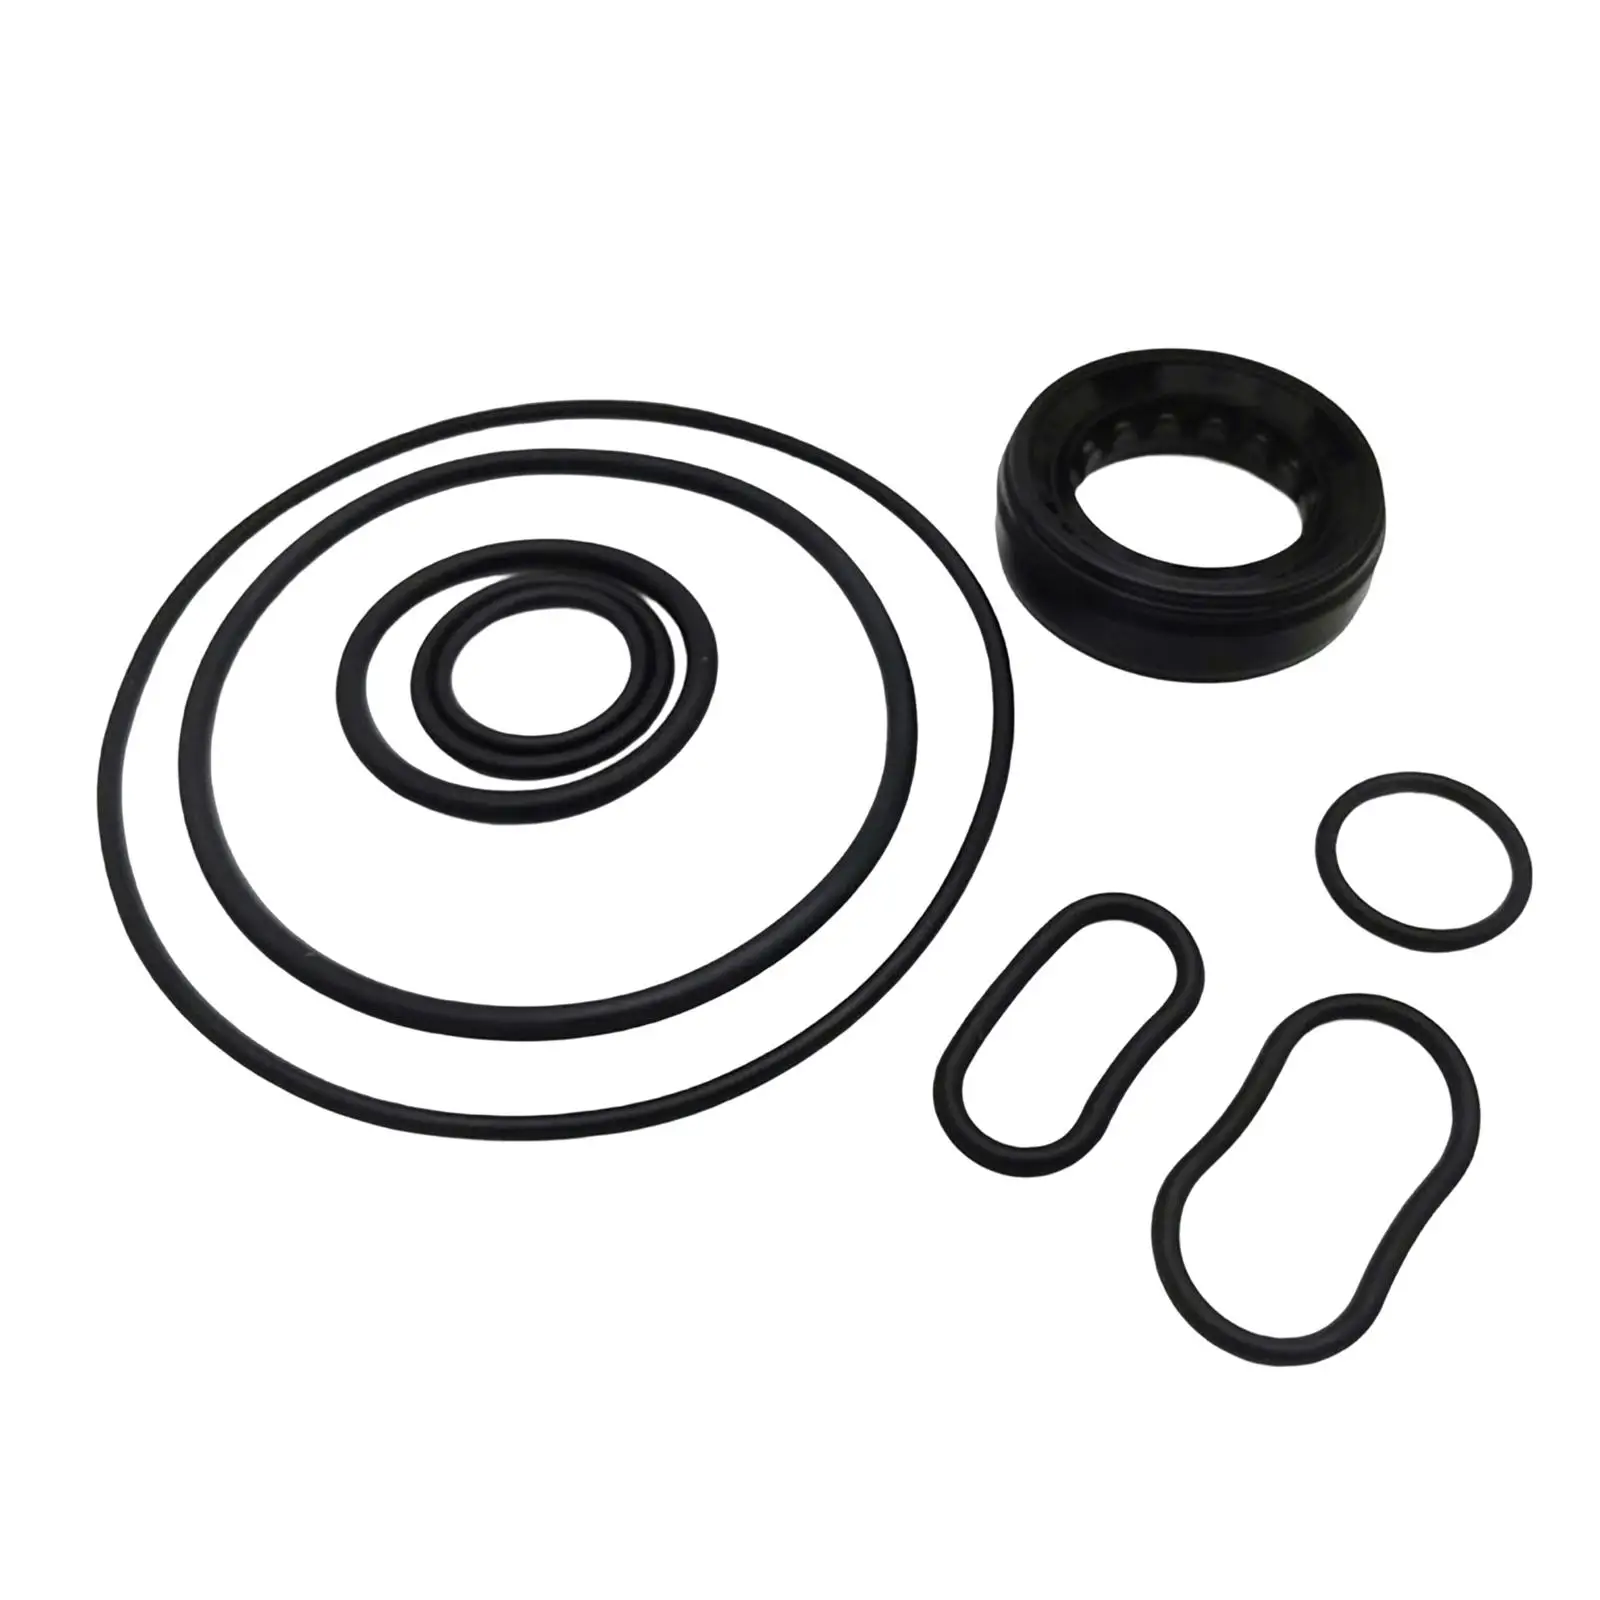 Power Steering Pump Seal Kit 06539-Pnc-003 Replacement for Honda Accord